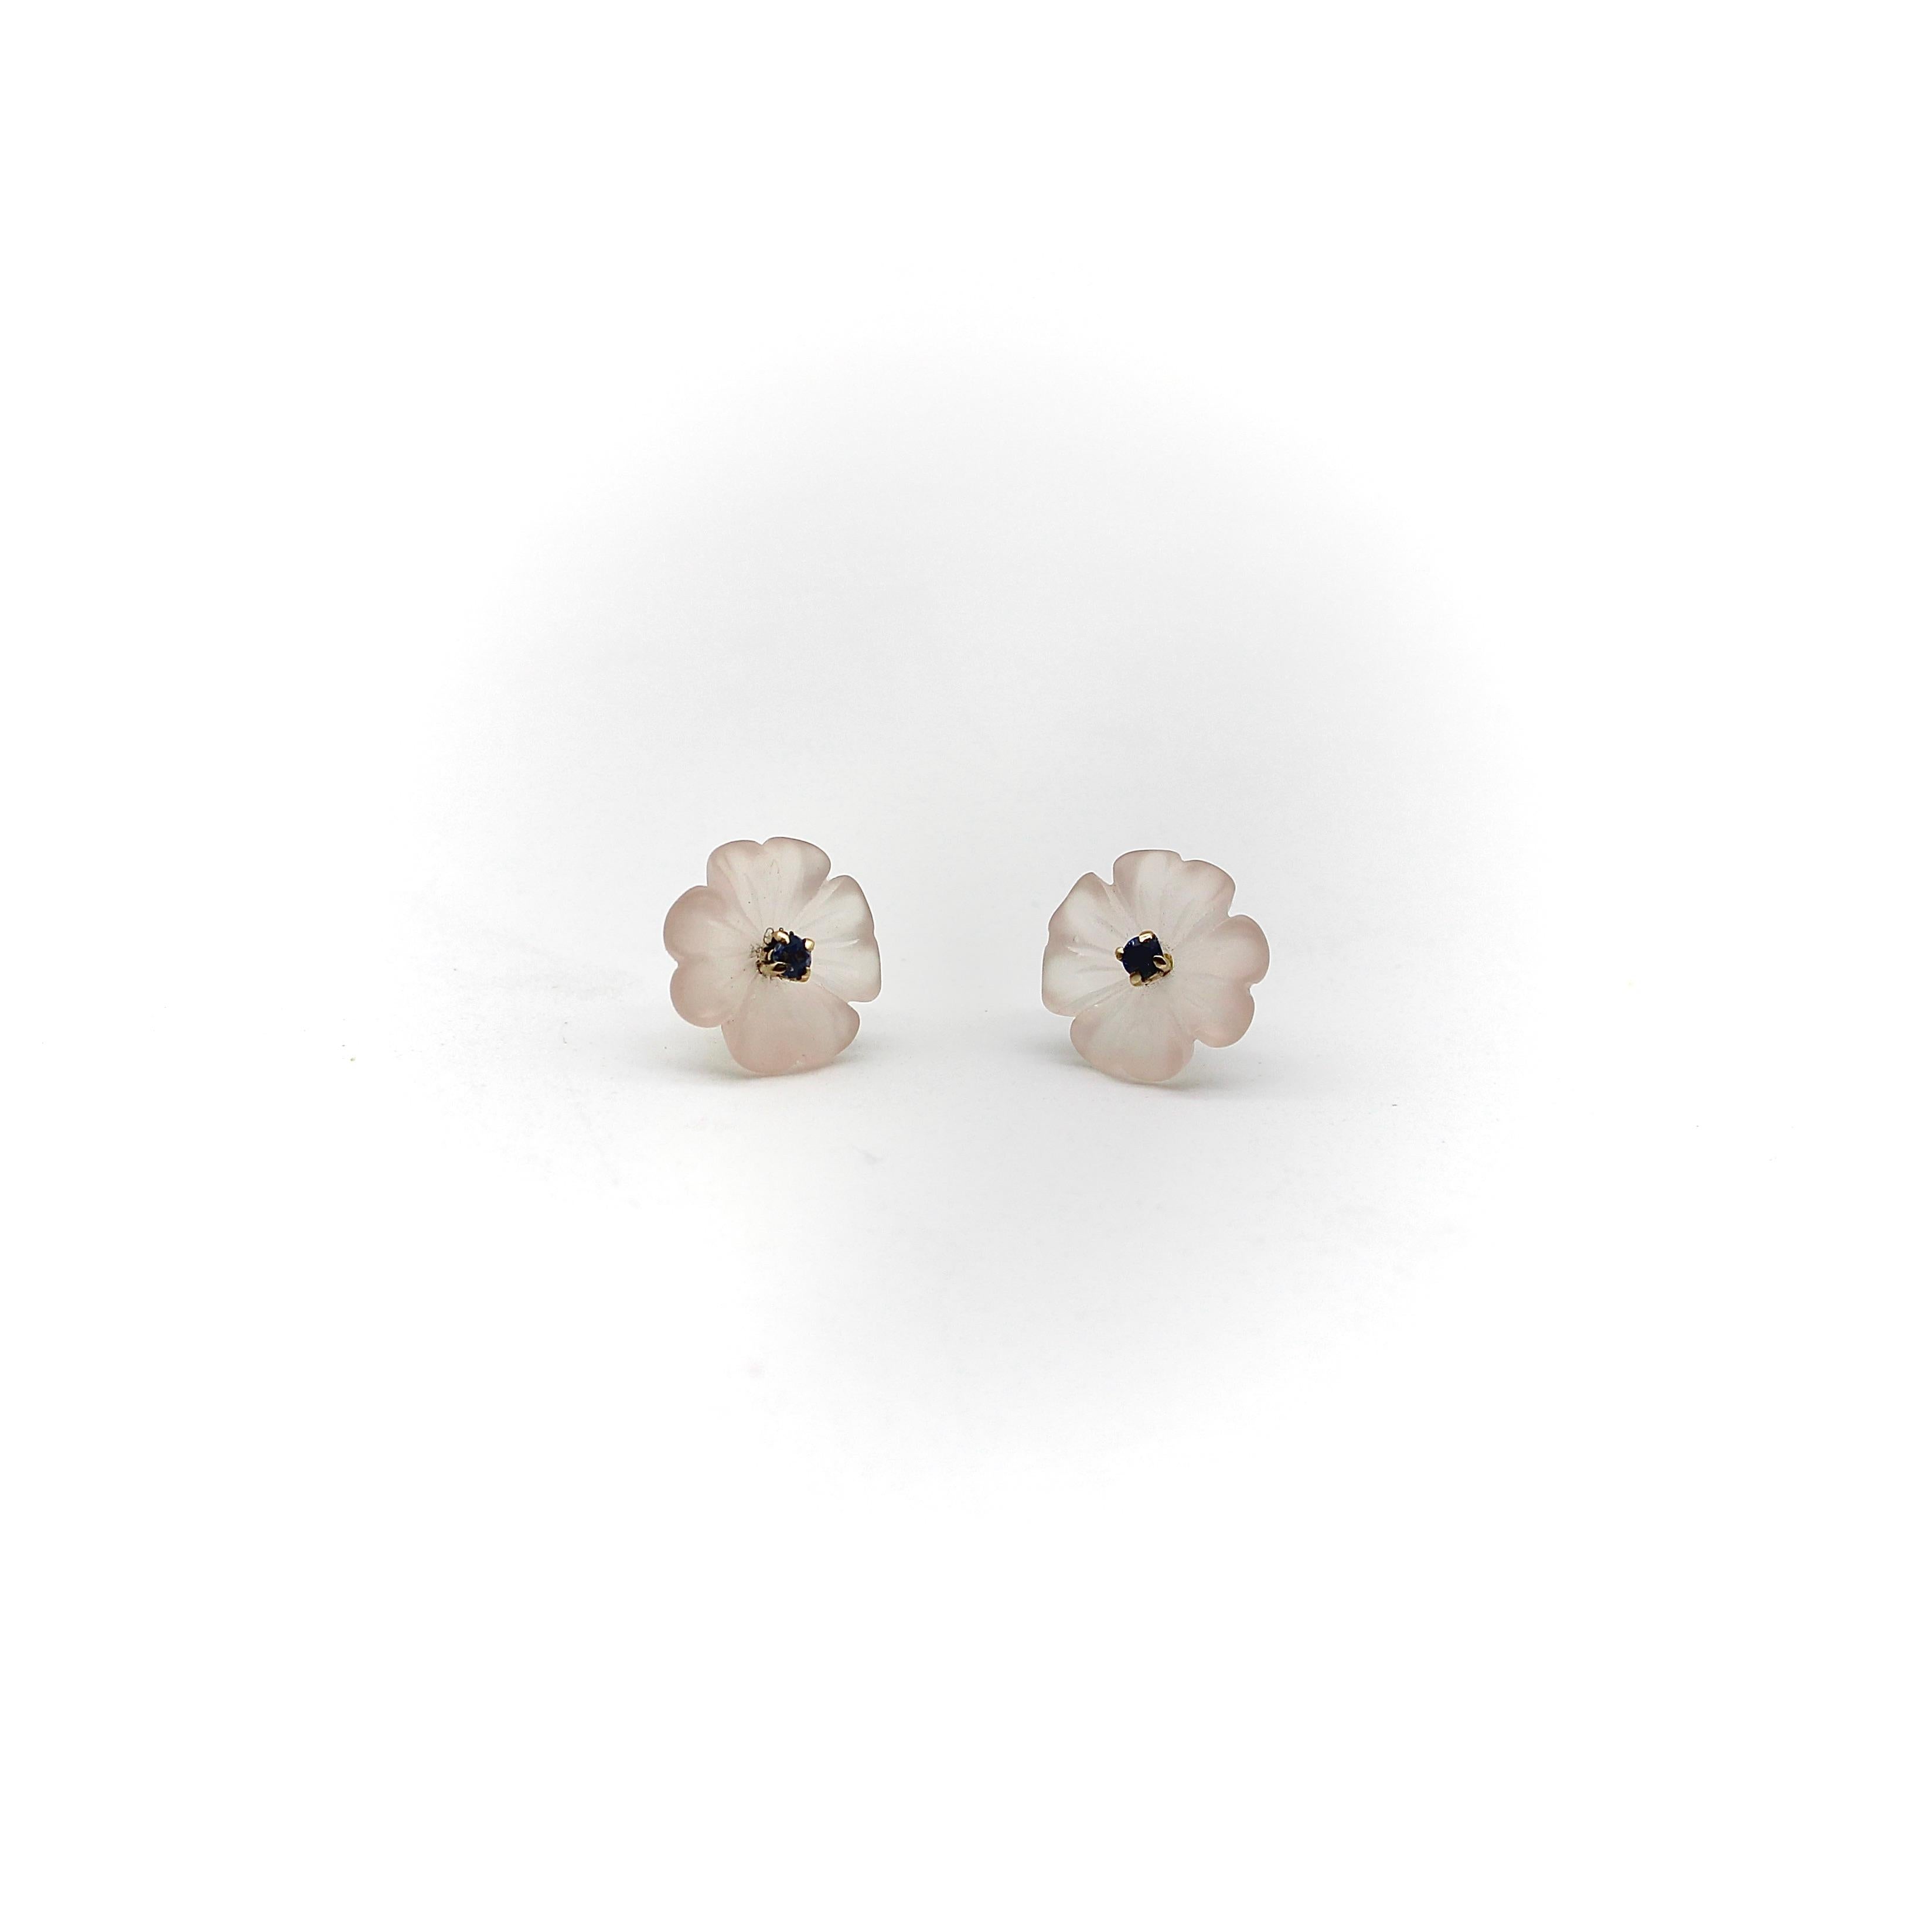 These 14k gold stud earrings feature beautiful hand carved rose quartz in the shape of a flower. The flower has four petals that undulate when viewed from the side, and contain a tiny blue sapphire prong-set as the flower’s piston. The rose quartz